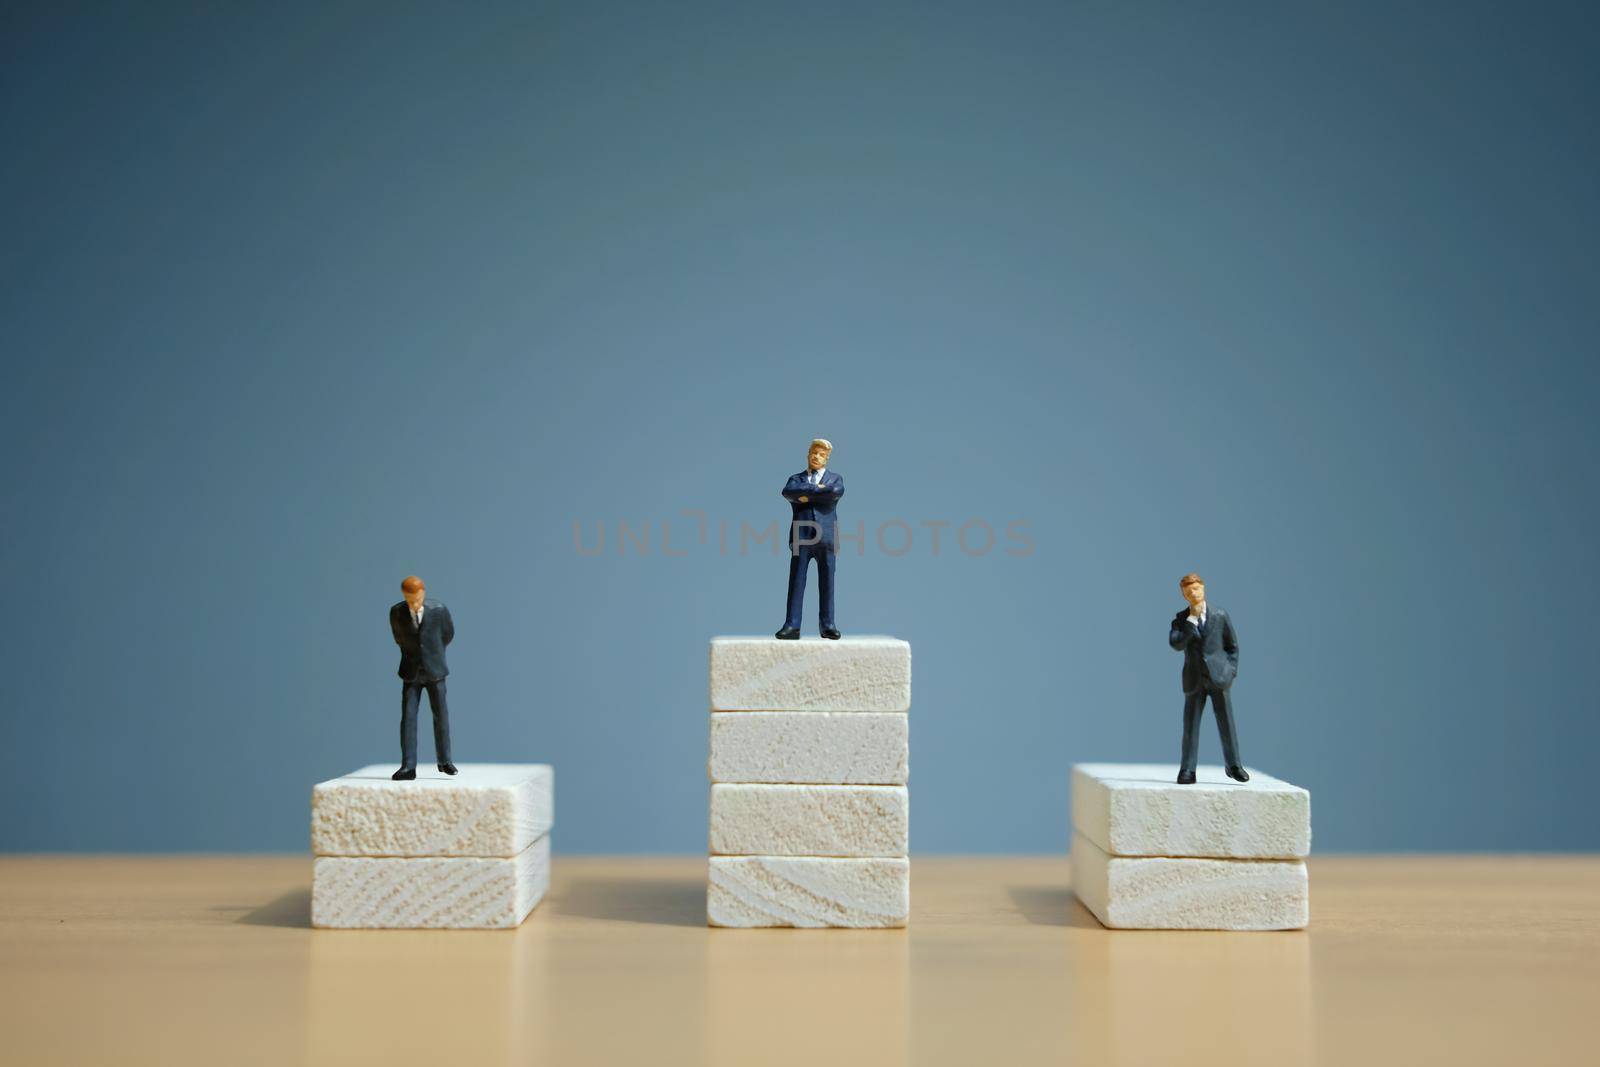 Business strategy conceptual photo - Miniature of businessman stands on a podium. Image photo